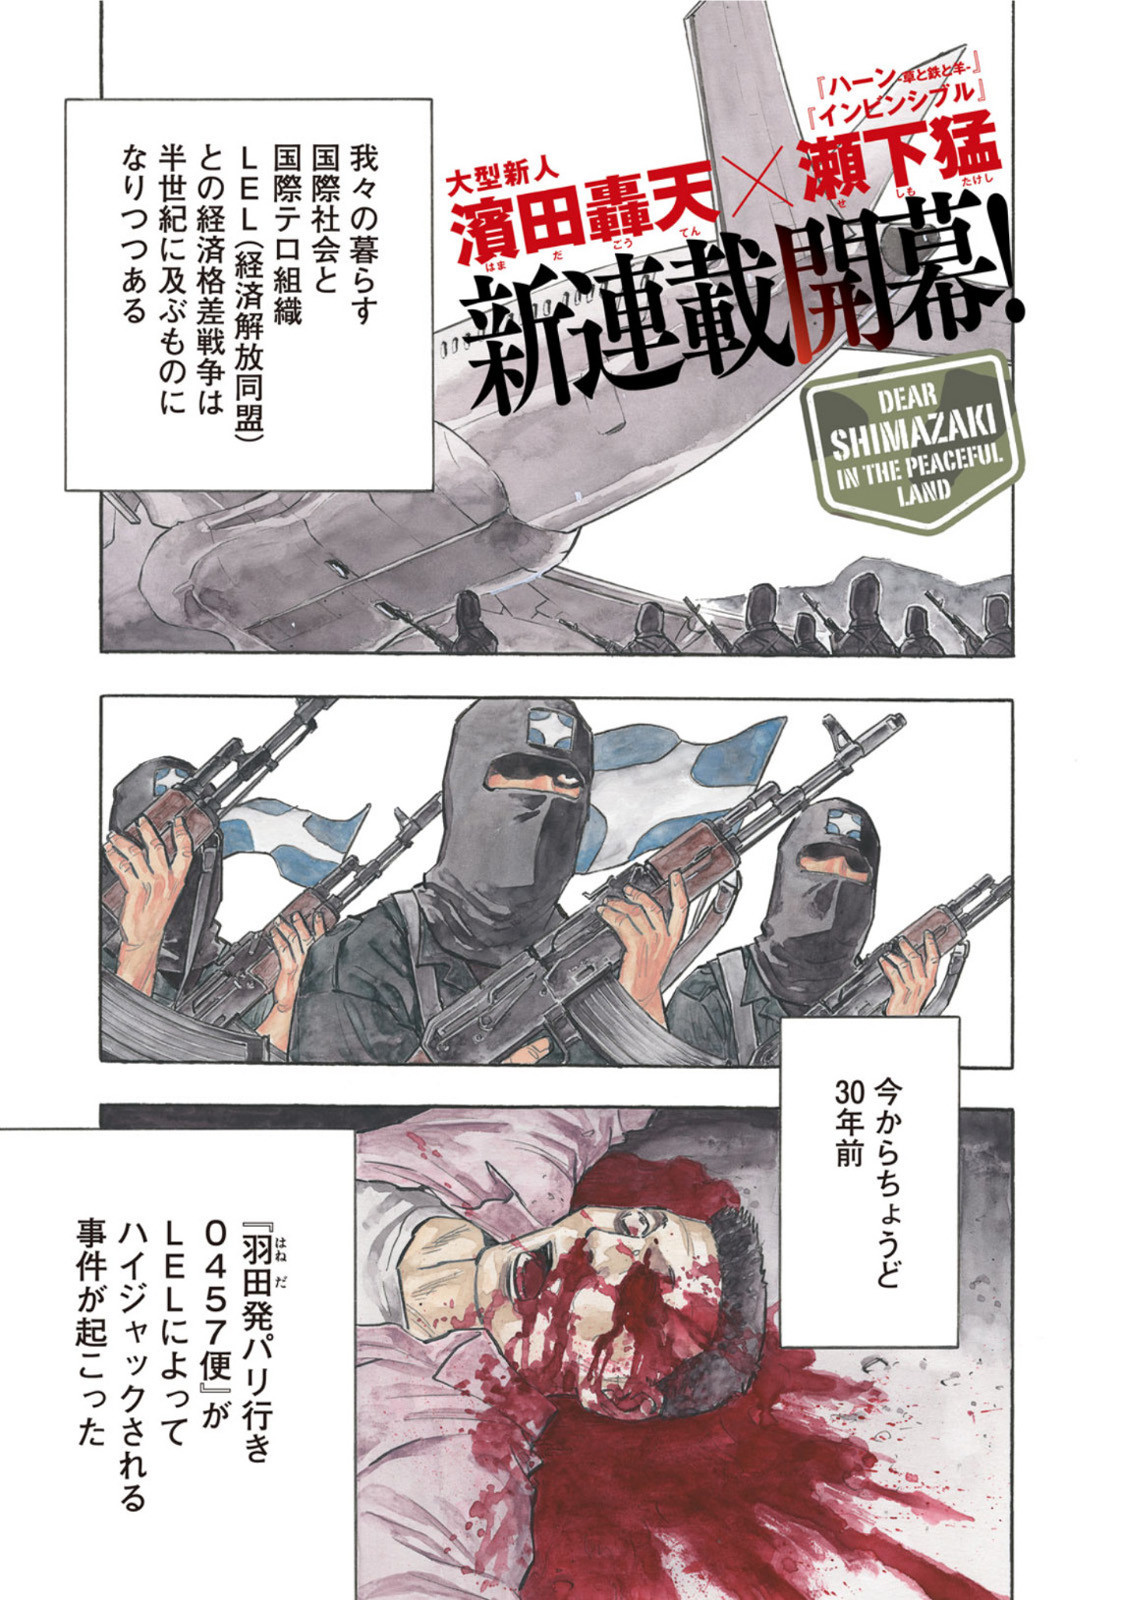 Weekly Morning - 週刊モーニング - Chapter 2022-36-37 - Page 3